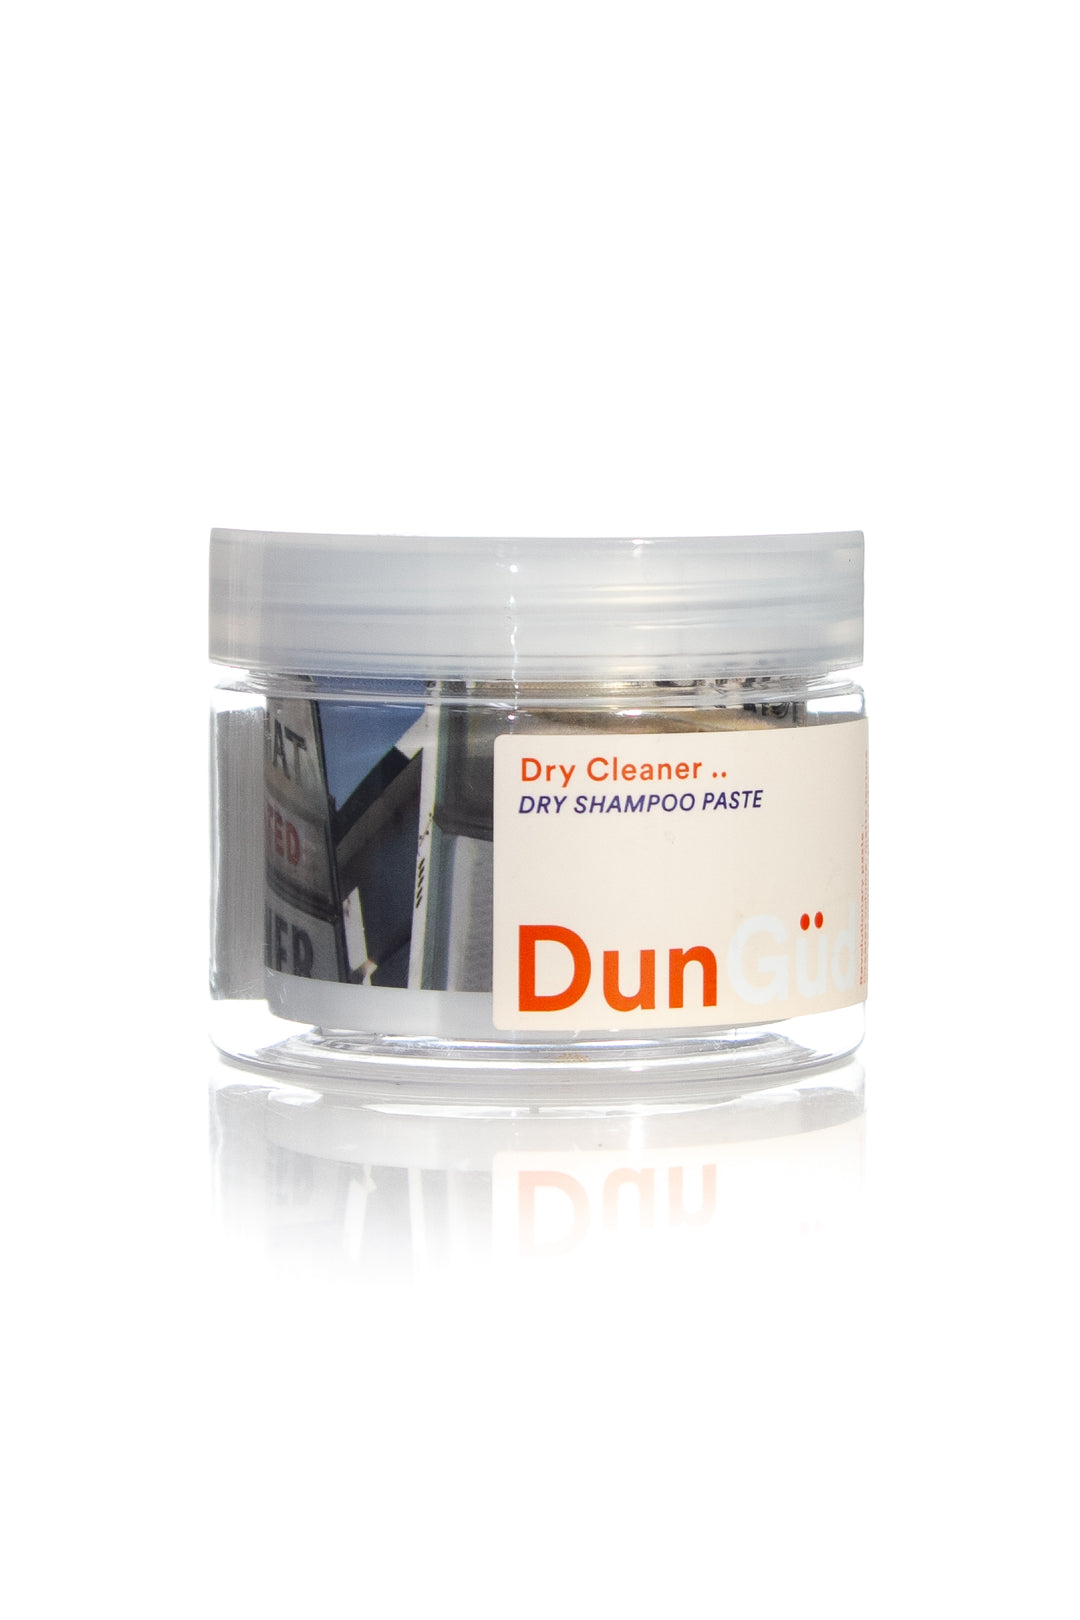 DUNGUD Dry Cleaner Dry Shampoo Paste  | 100g